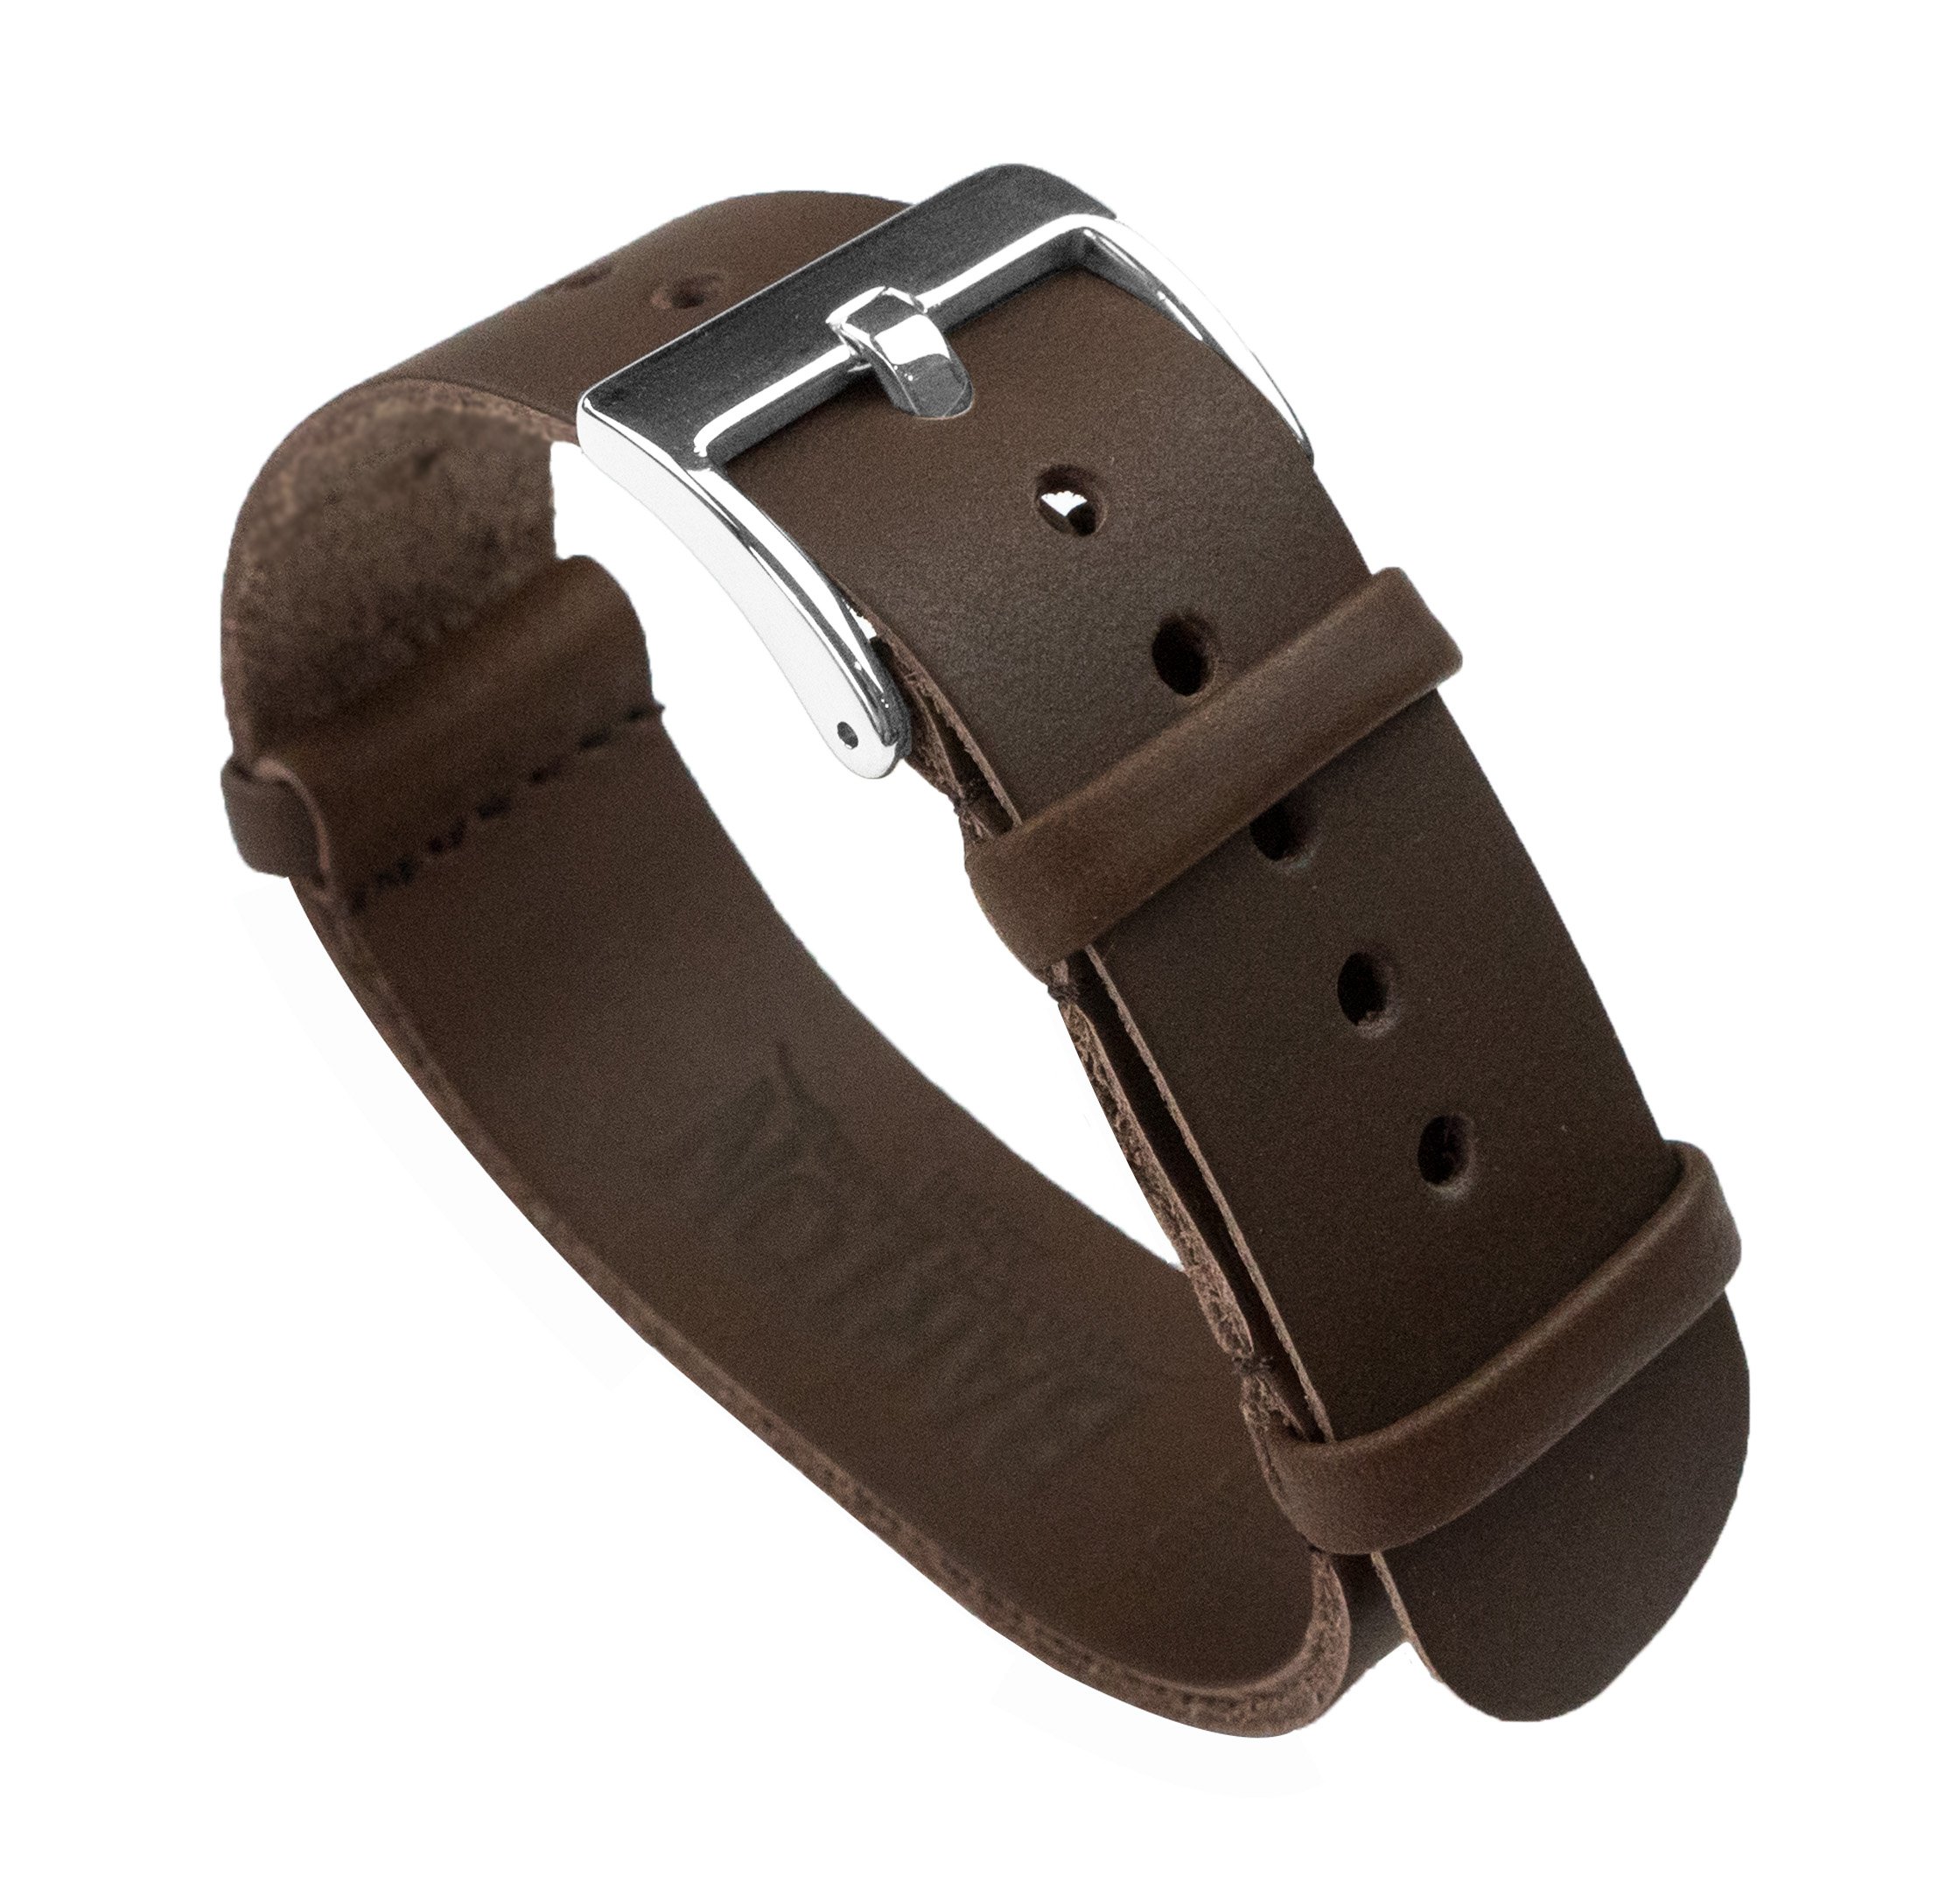 BARTON Leather NATO® Style Watch Straps - Choose Color, Length & Width - 18mm, 20mm, 22mm, 24mm Bands